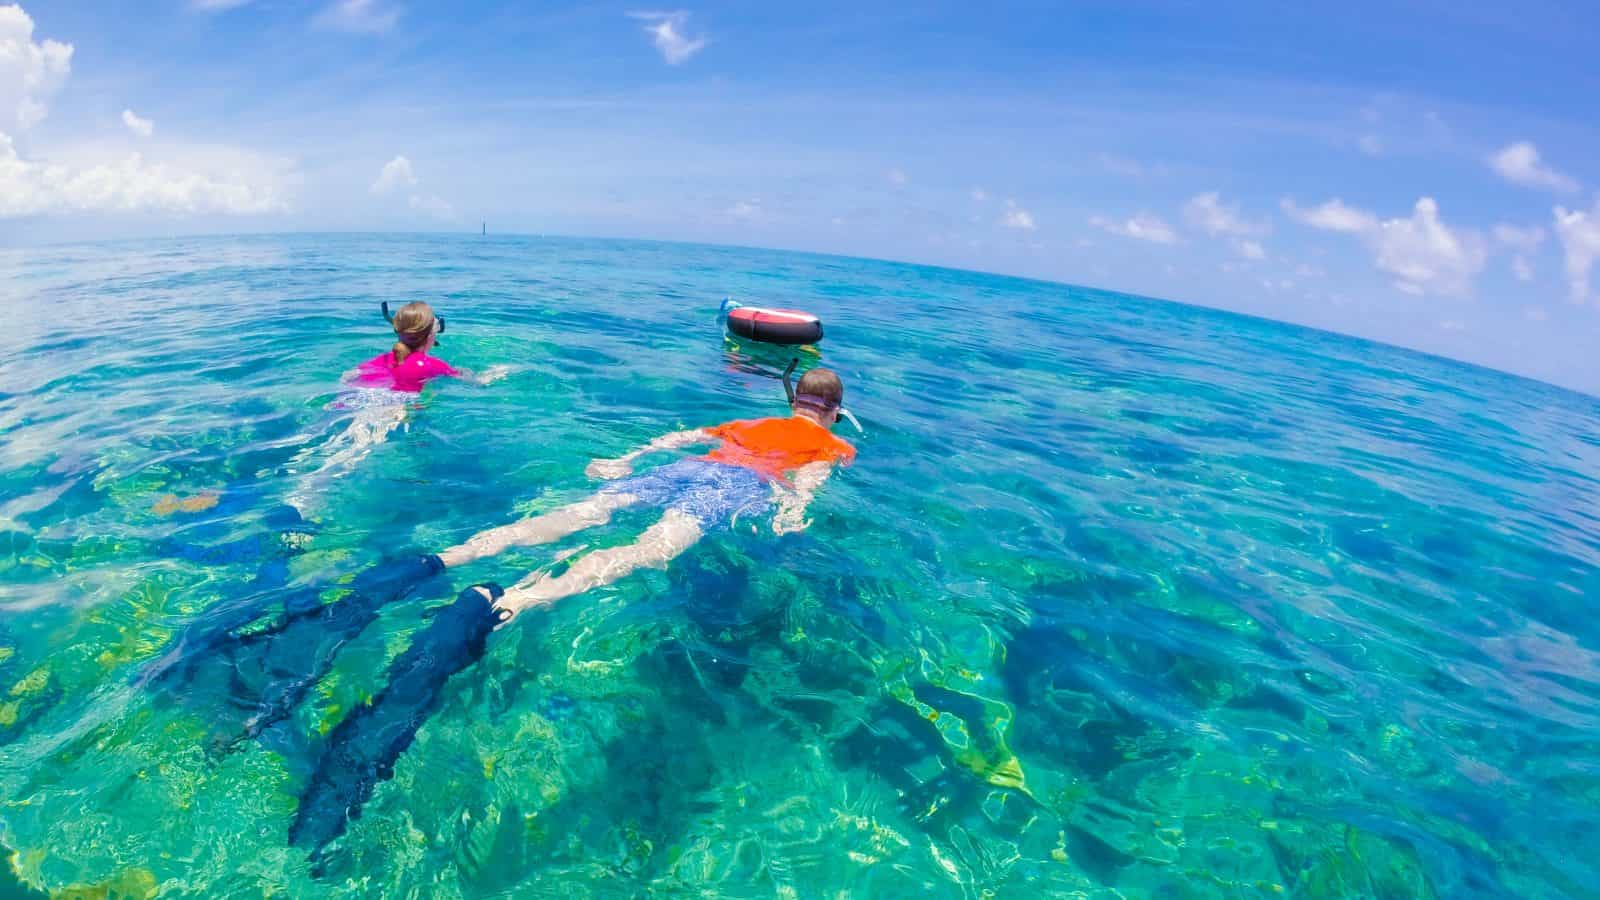 two people snorkeling off the coast of florida